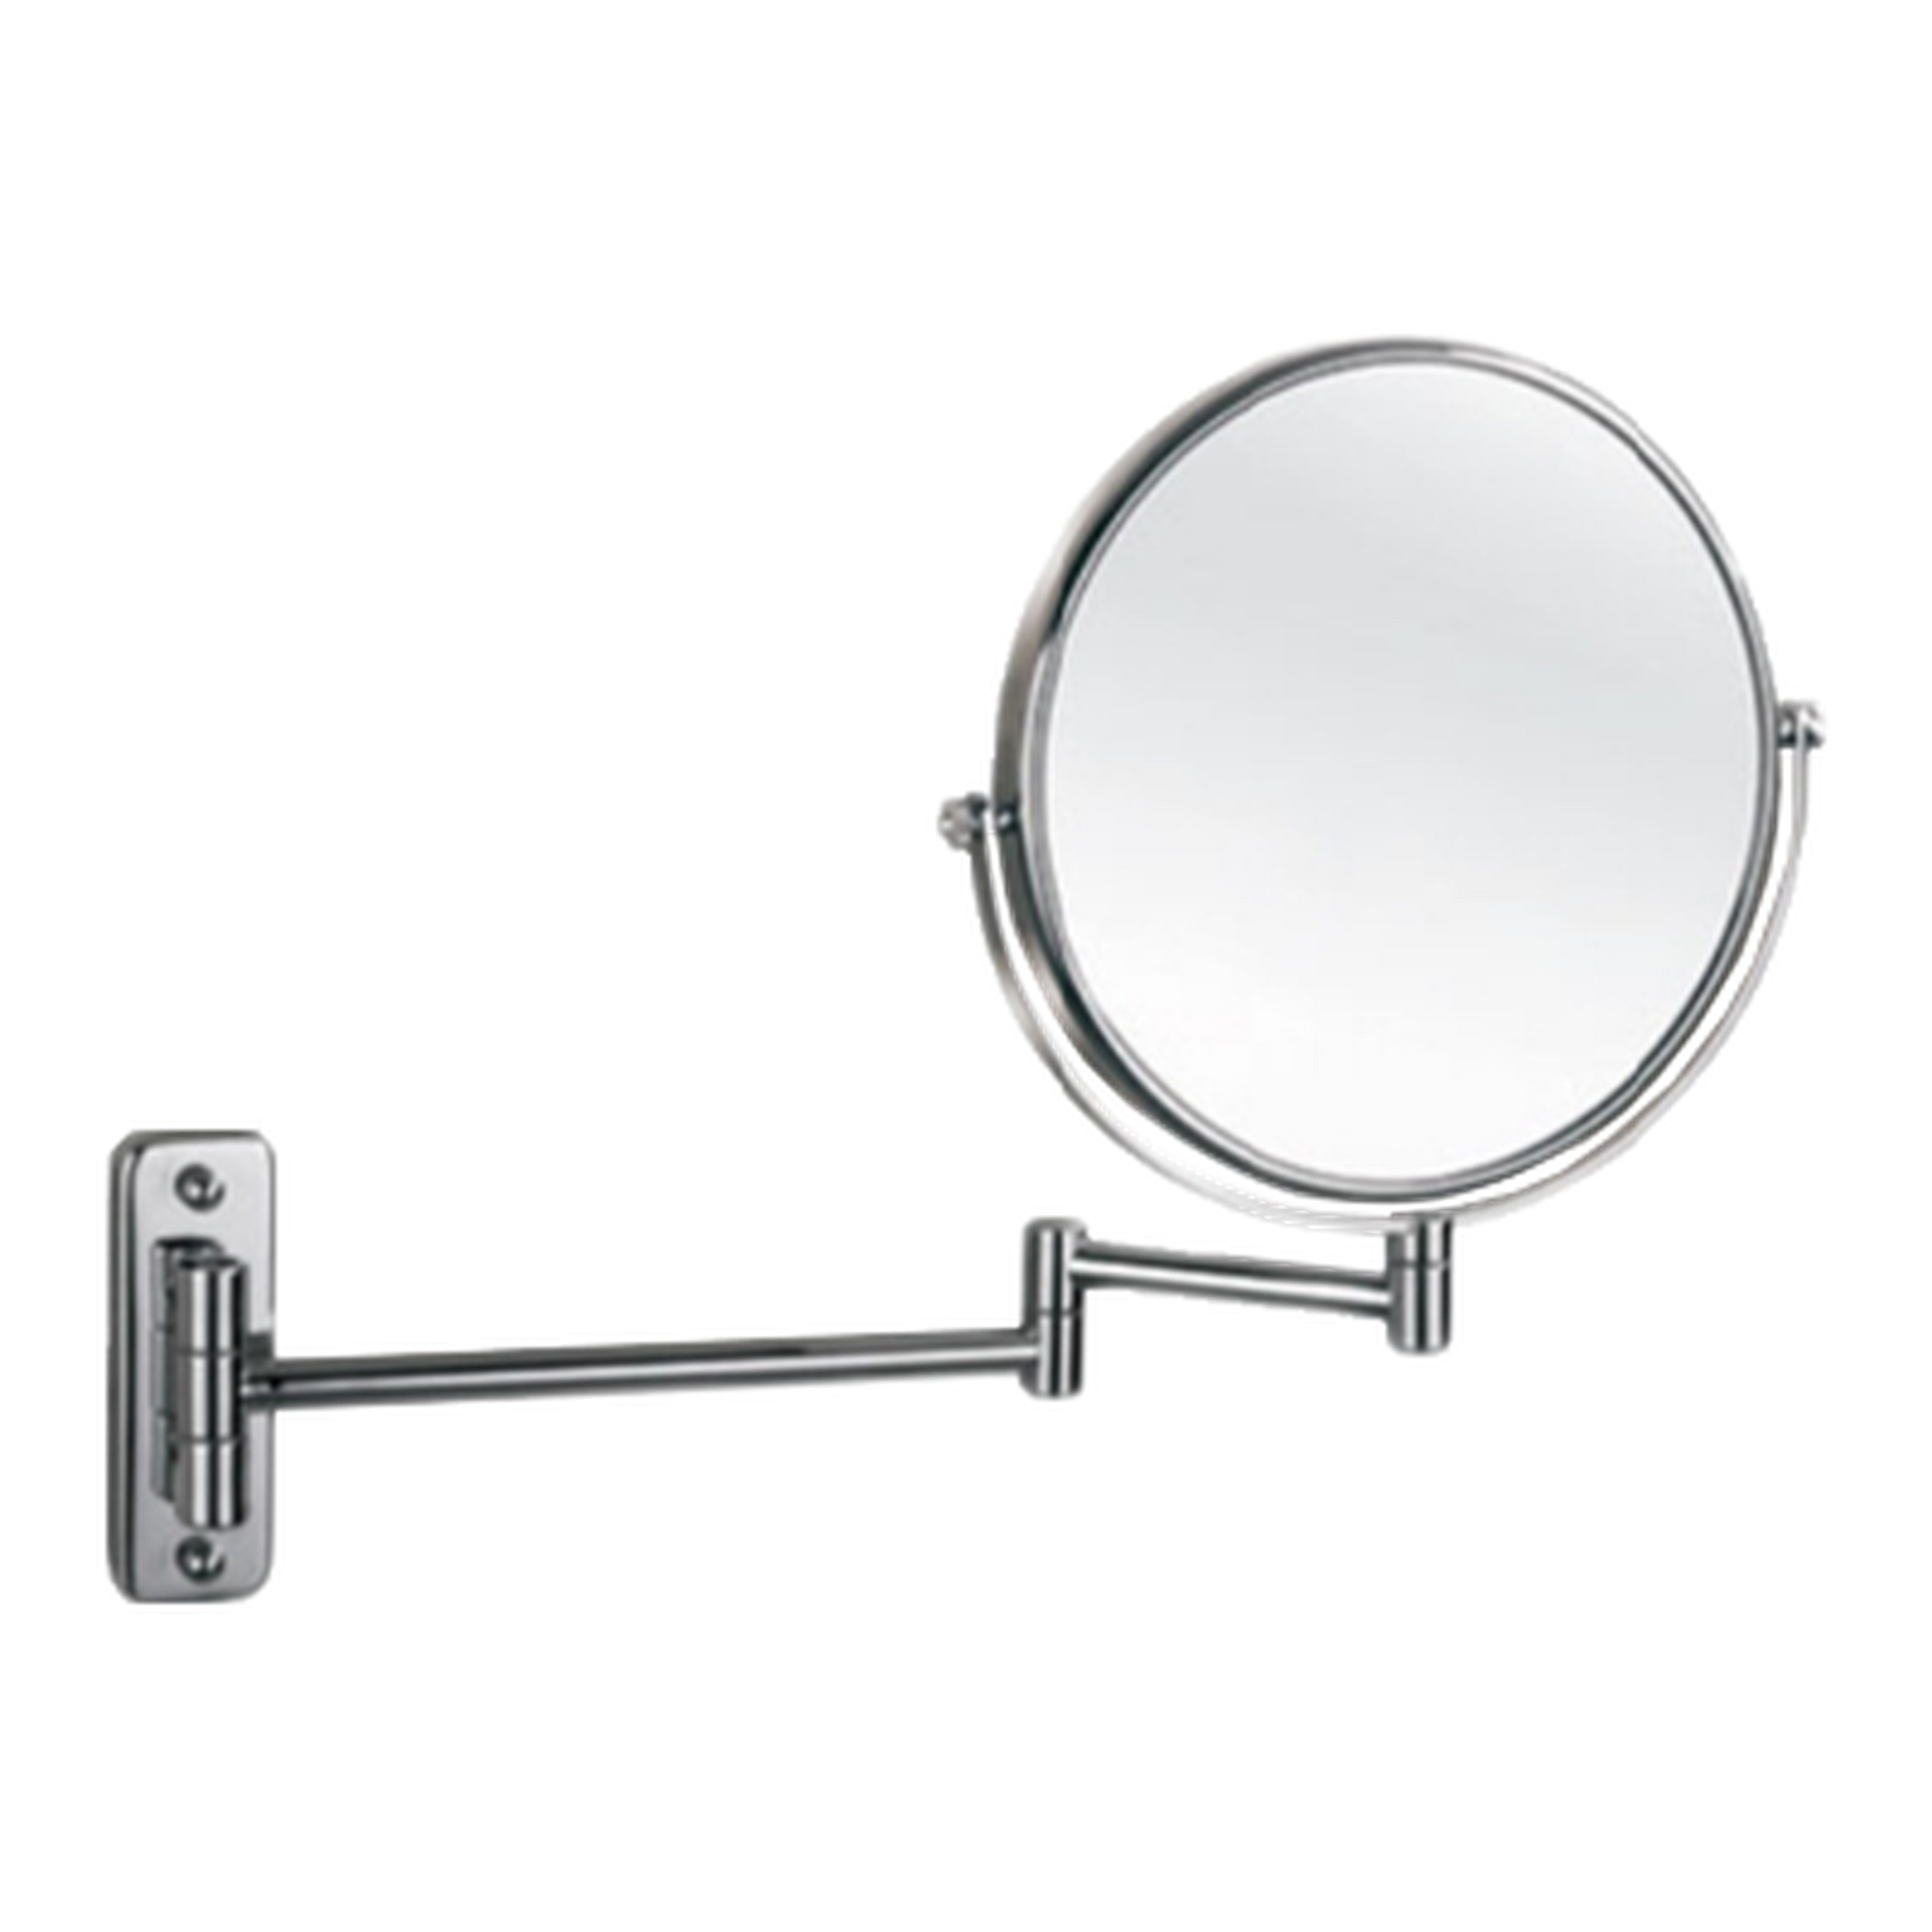 Afina 8" Polished Chrome Round Double Sided Wall Mount Makeup Mirror